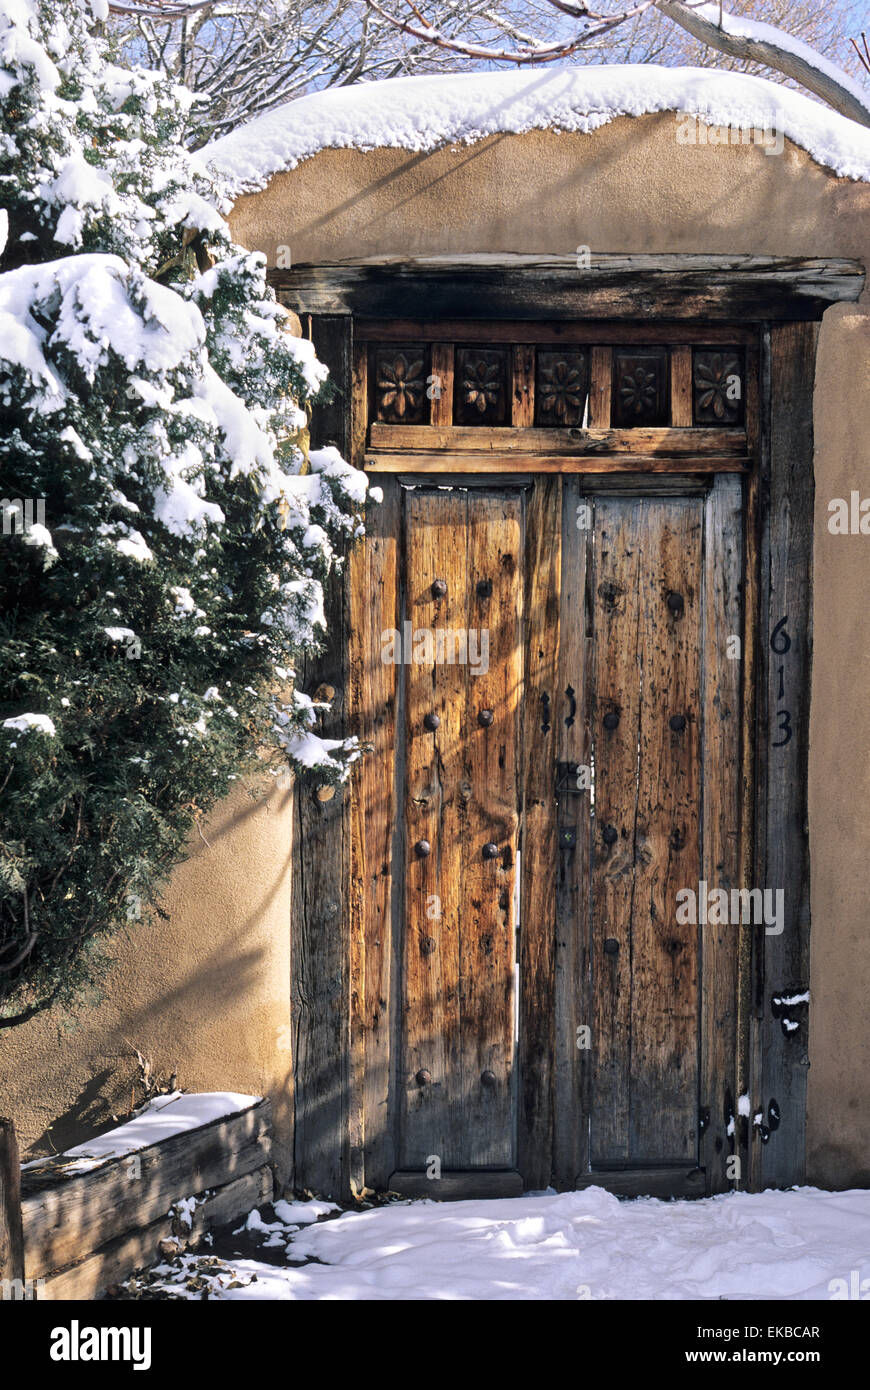 A wooden gate set into an adobe wall seems to take on a ronamtic air when covered with a dusting of winter snow. Stock Photo